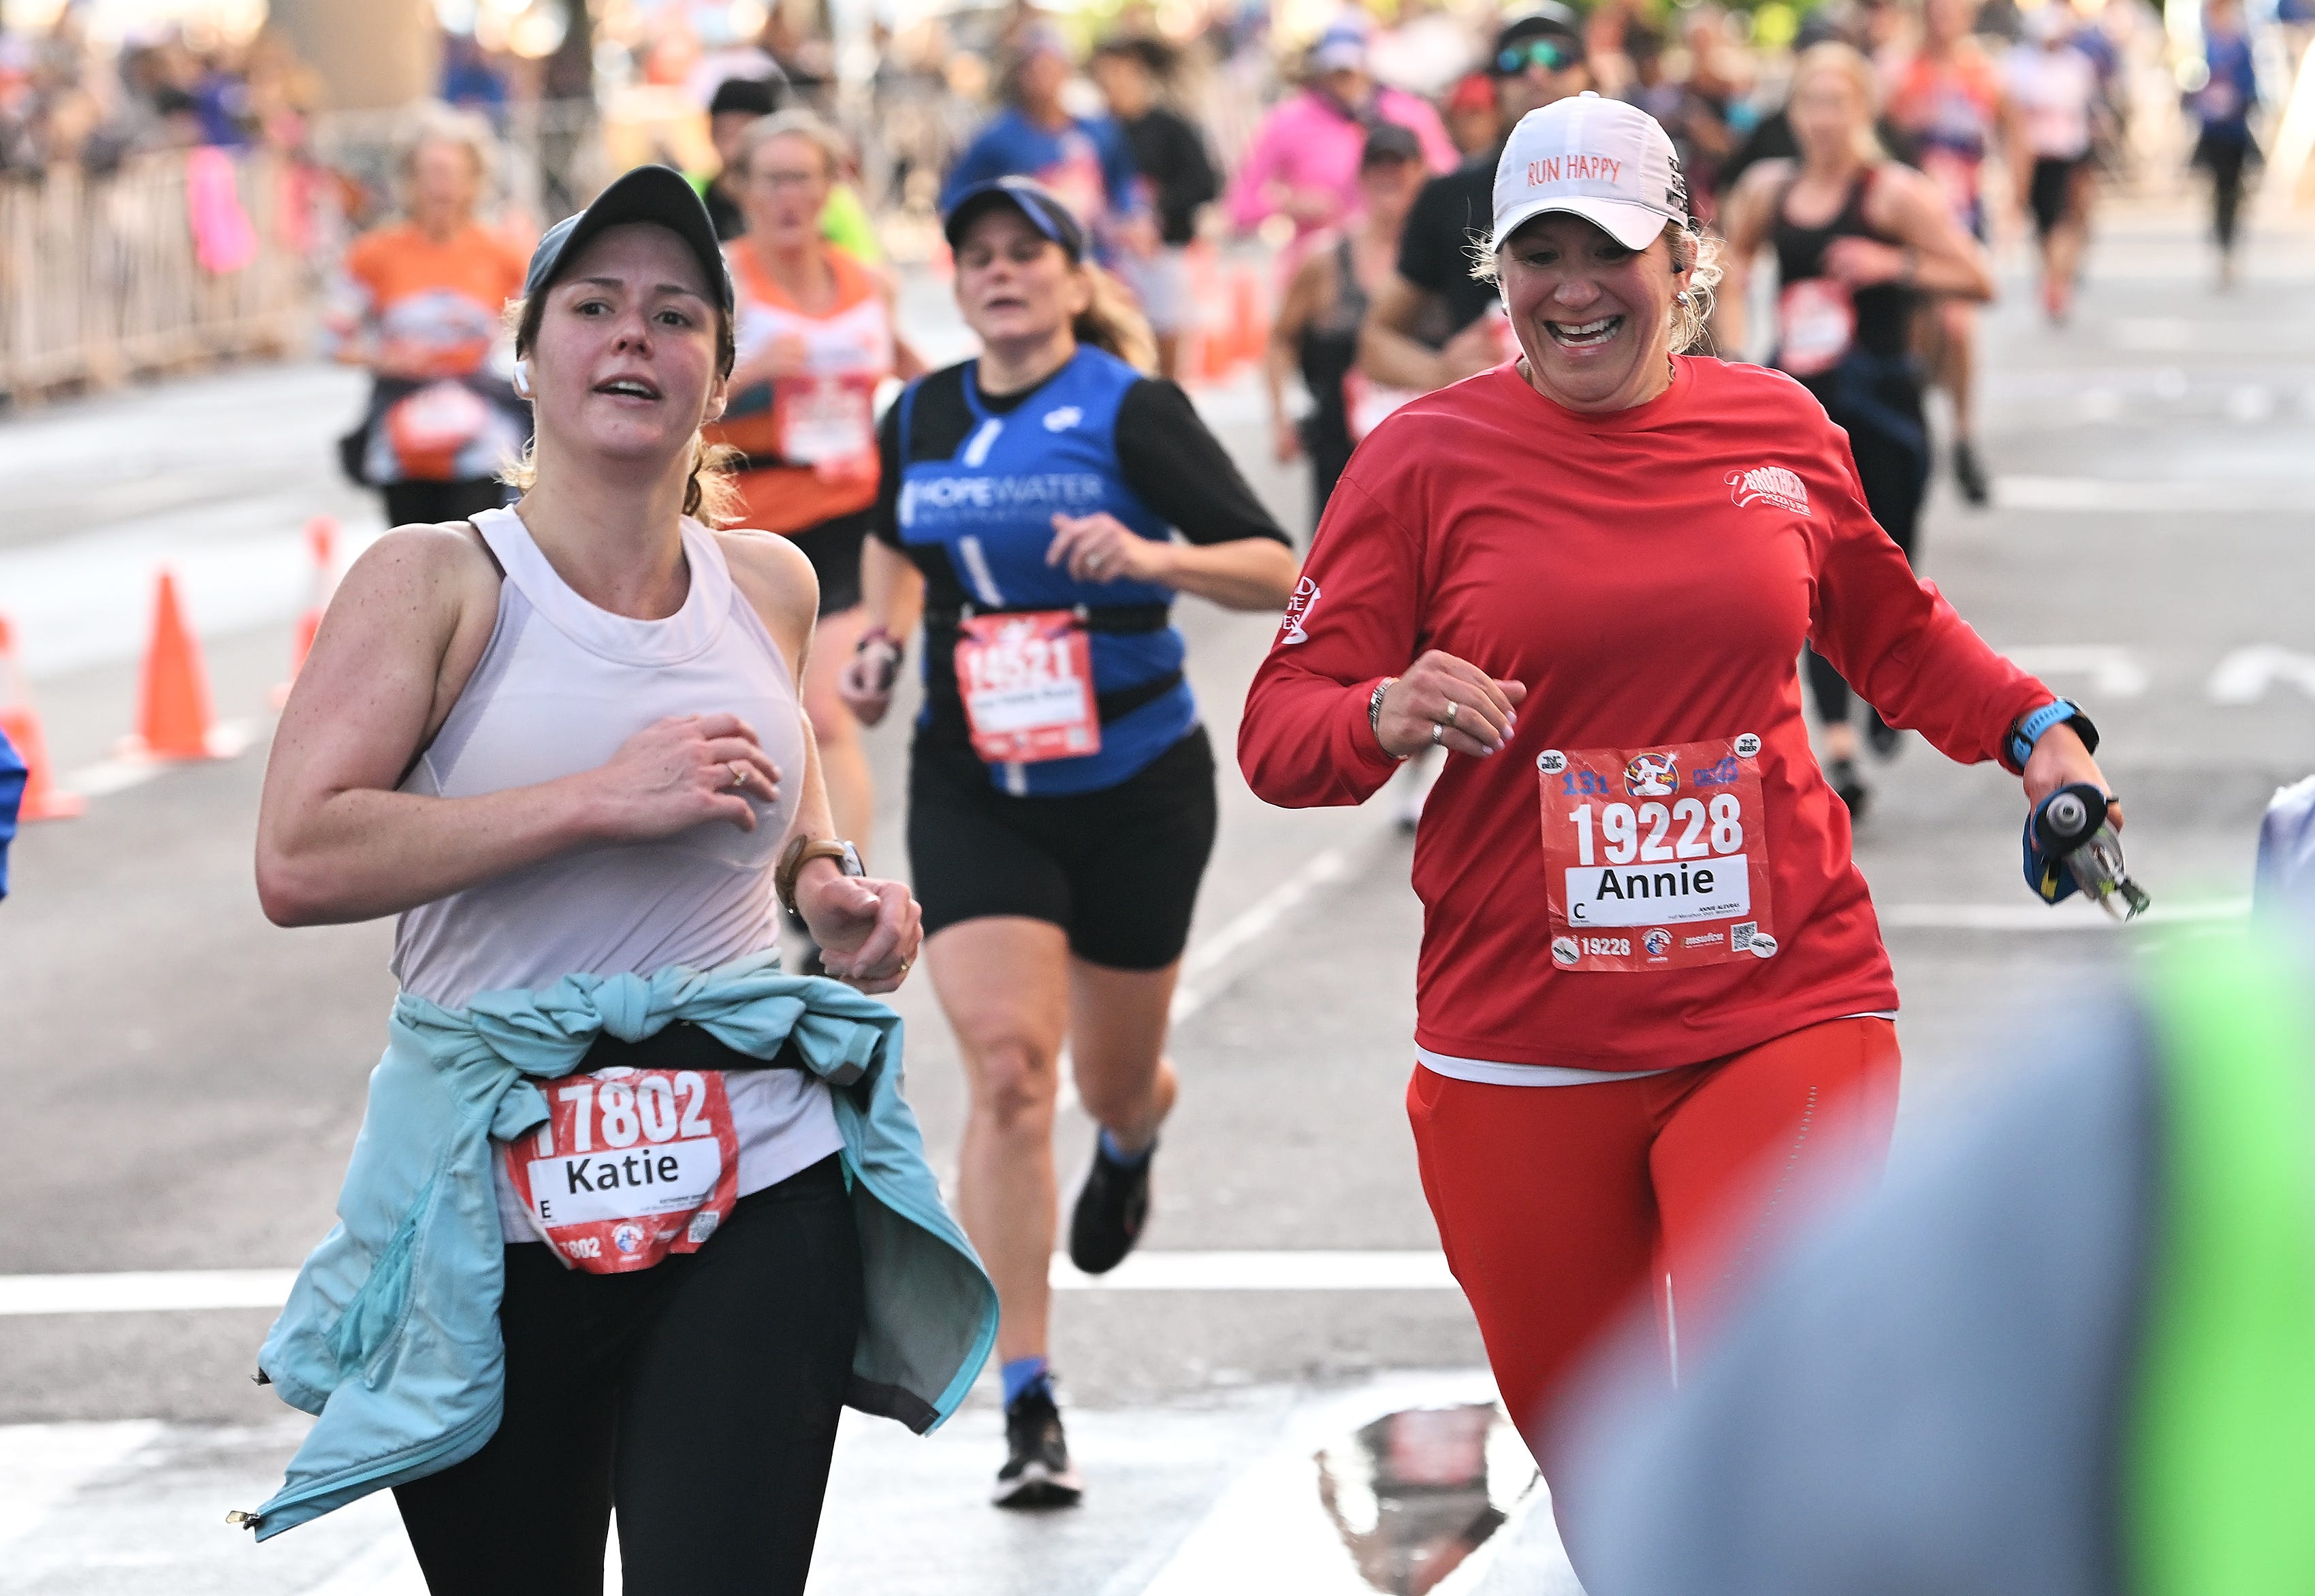 From left, Katharine Wagner, 36, of Bloomfield Hills and Annie Alevras, 47, of Salem, Conn. finish the half marathon.